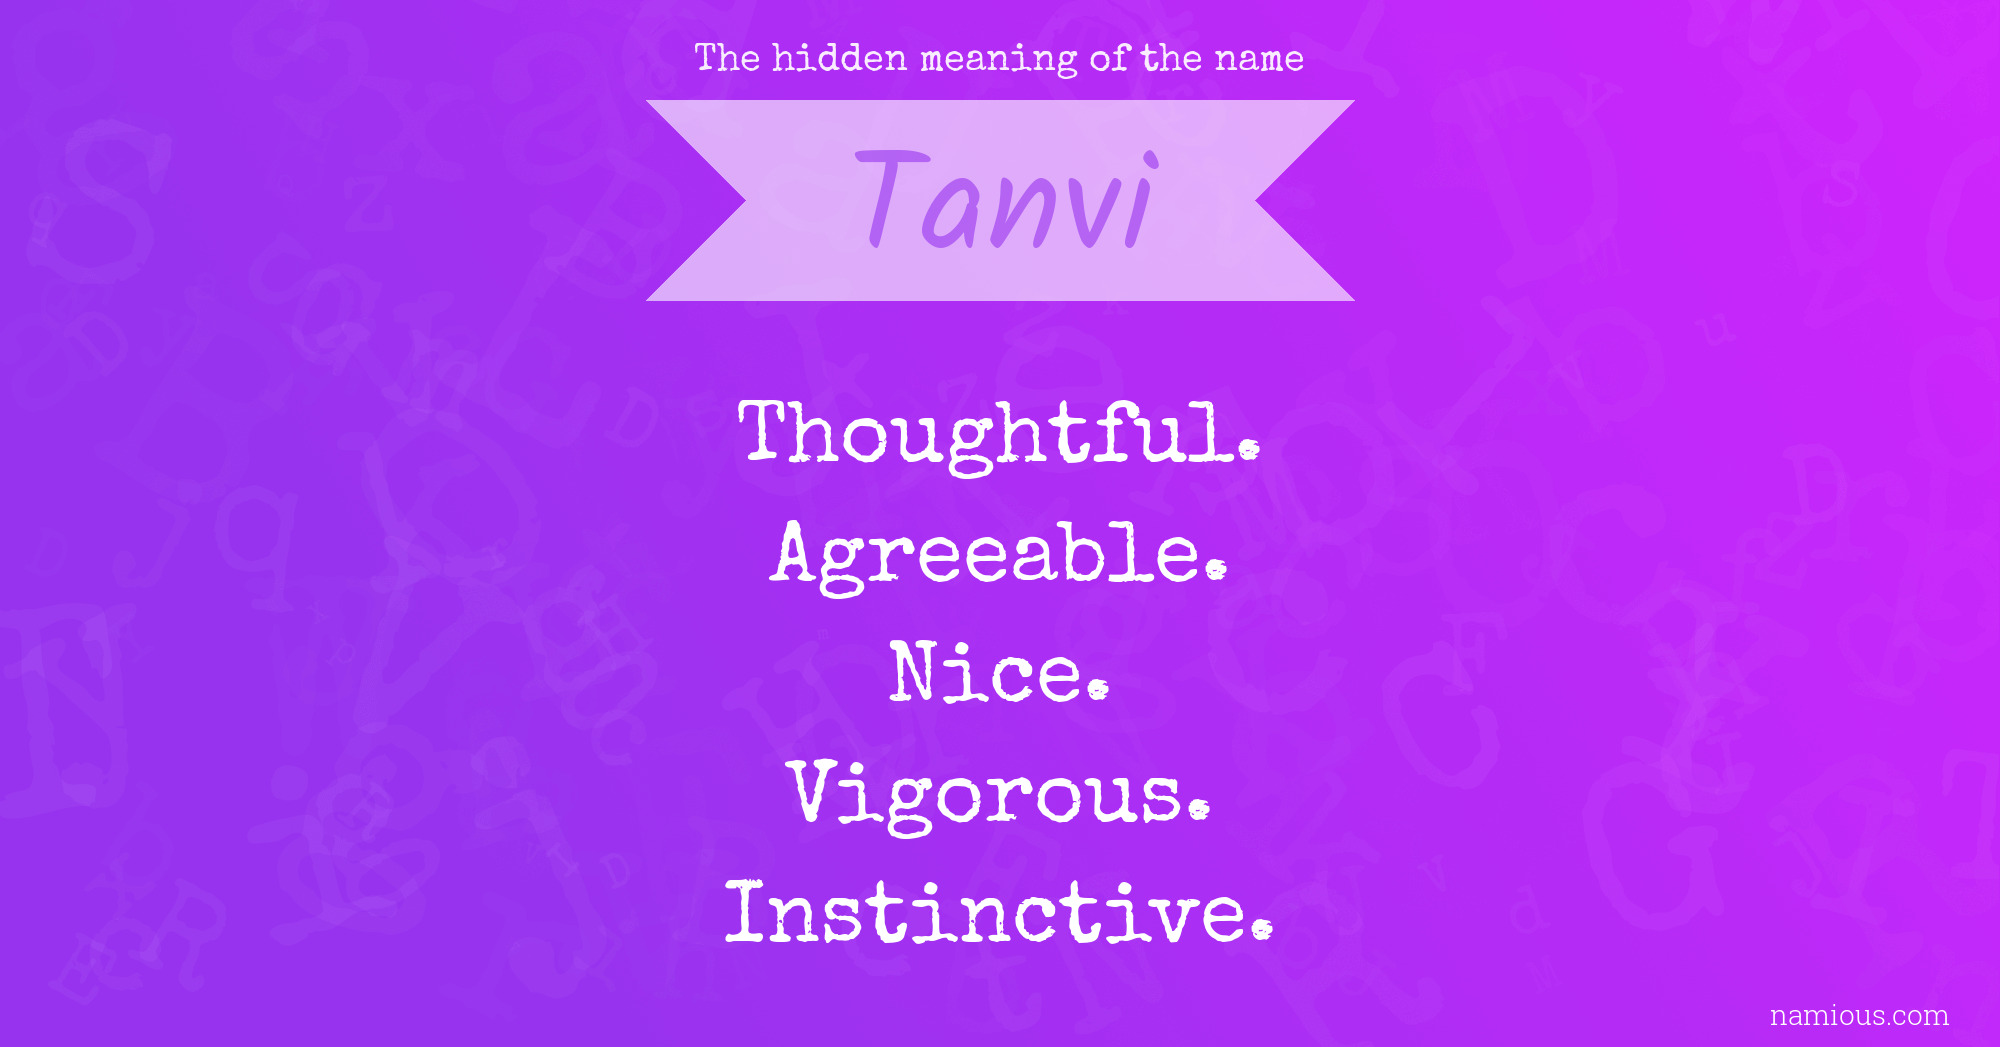 The hidden meaning of the name Tanvi